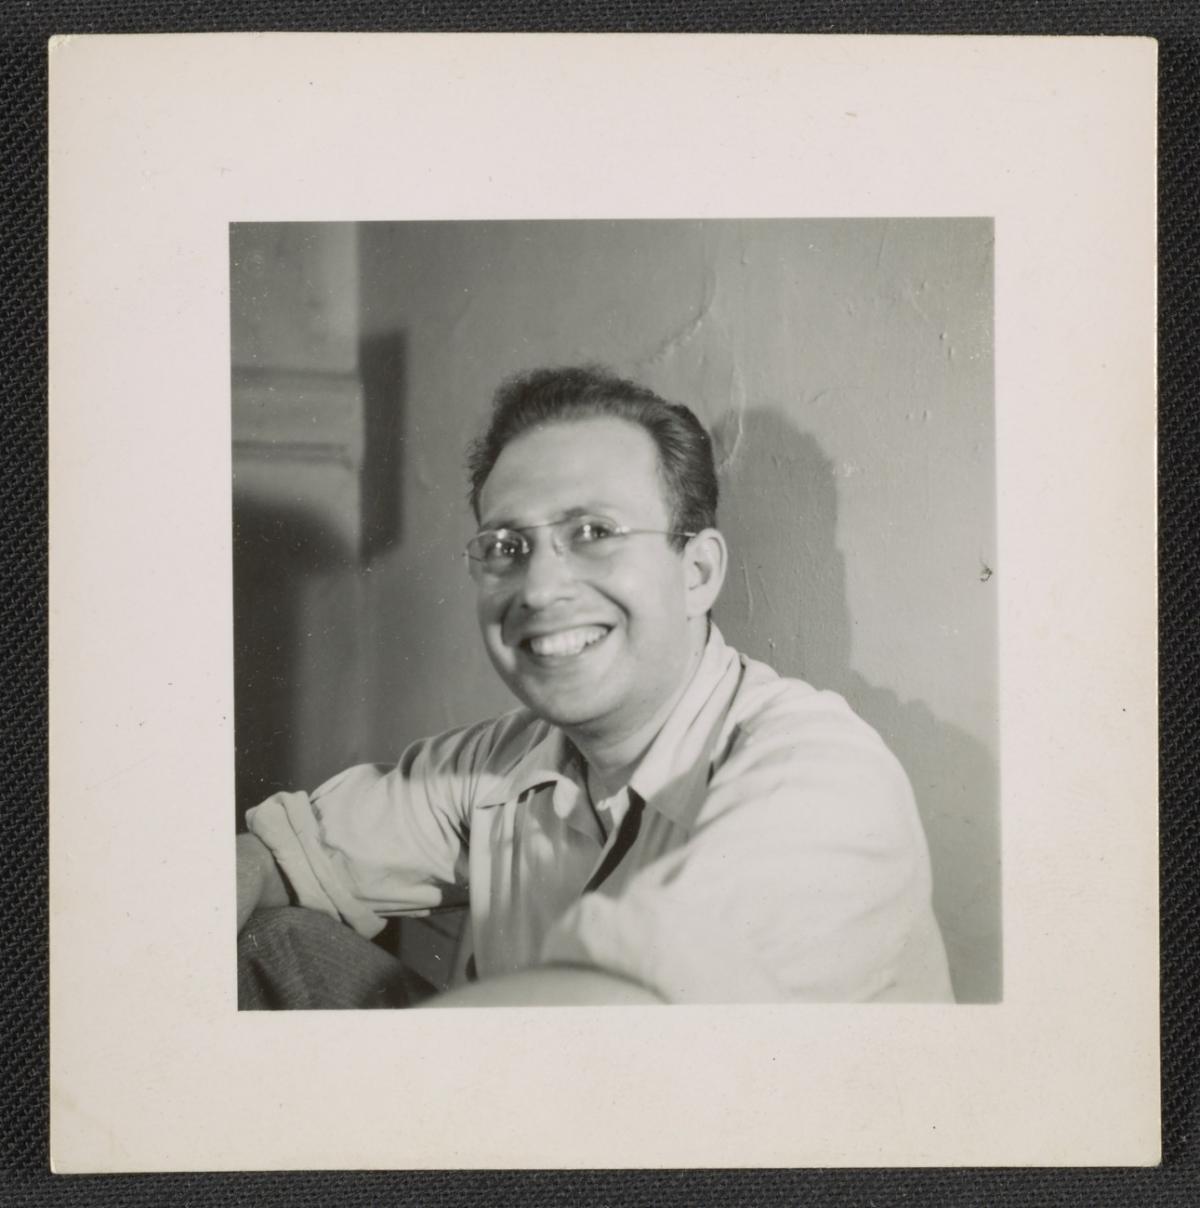 A black  and white photograph of the artist Philip Pearlstein. He is wearing glasses and has a big smile.